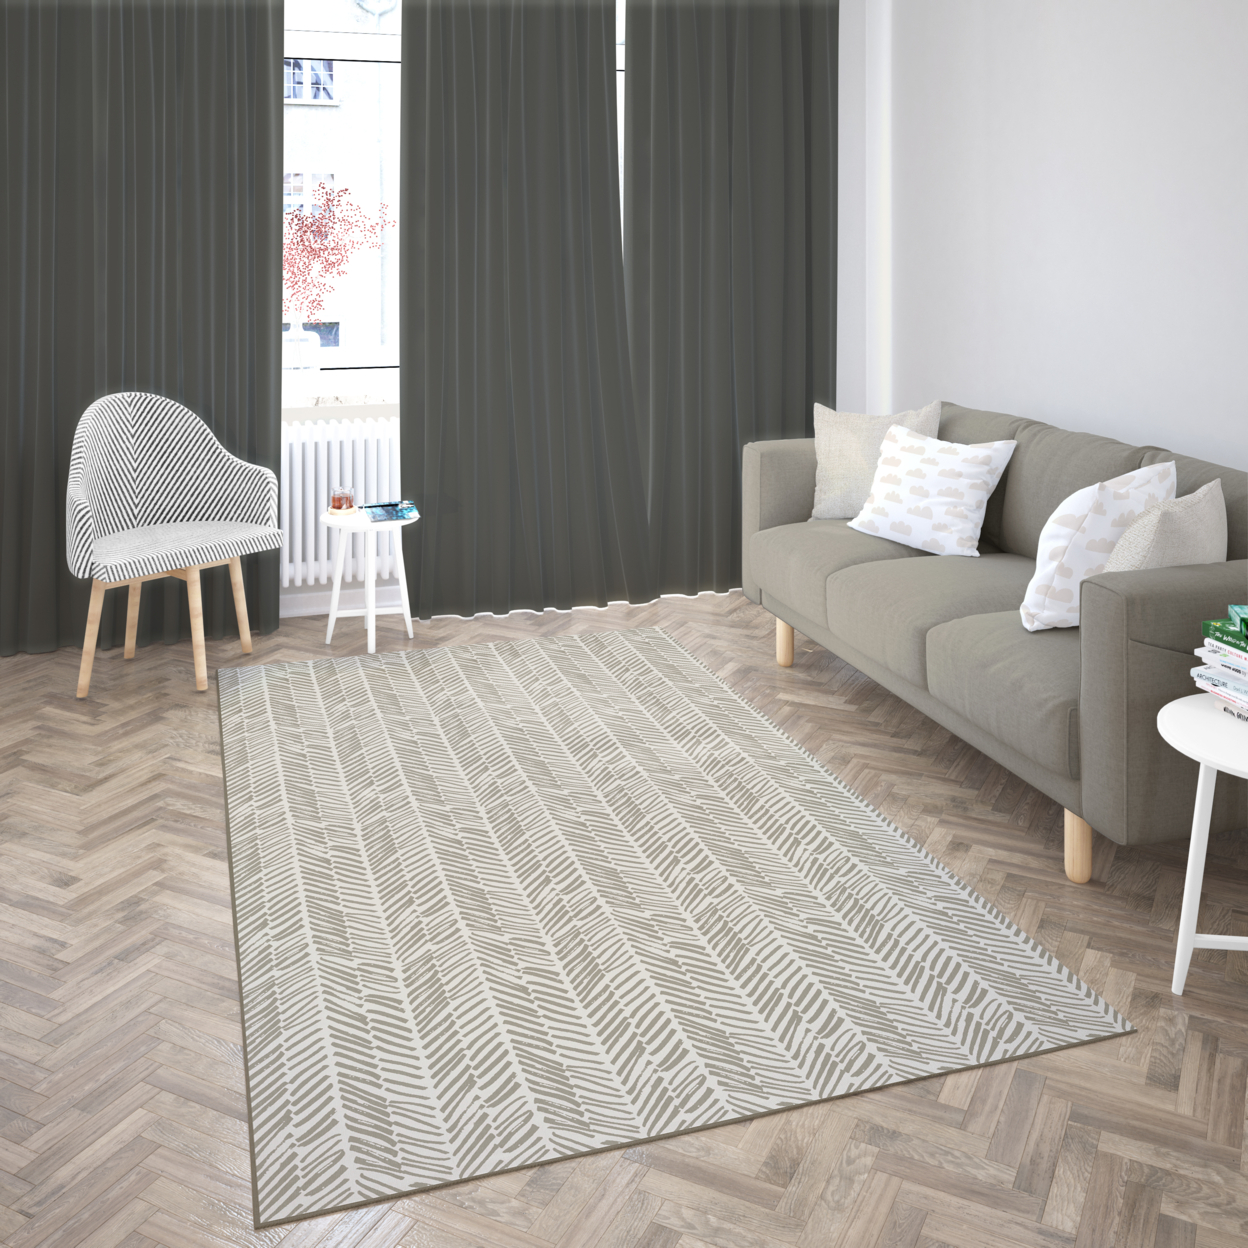 Deerlux Modern Living Room Area Rug With Nonslip Backing, Abstract Beige Chevron Strokes Pattern - 9 X 12